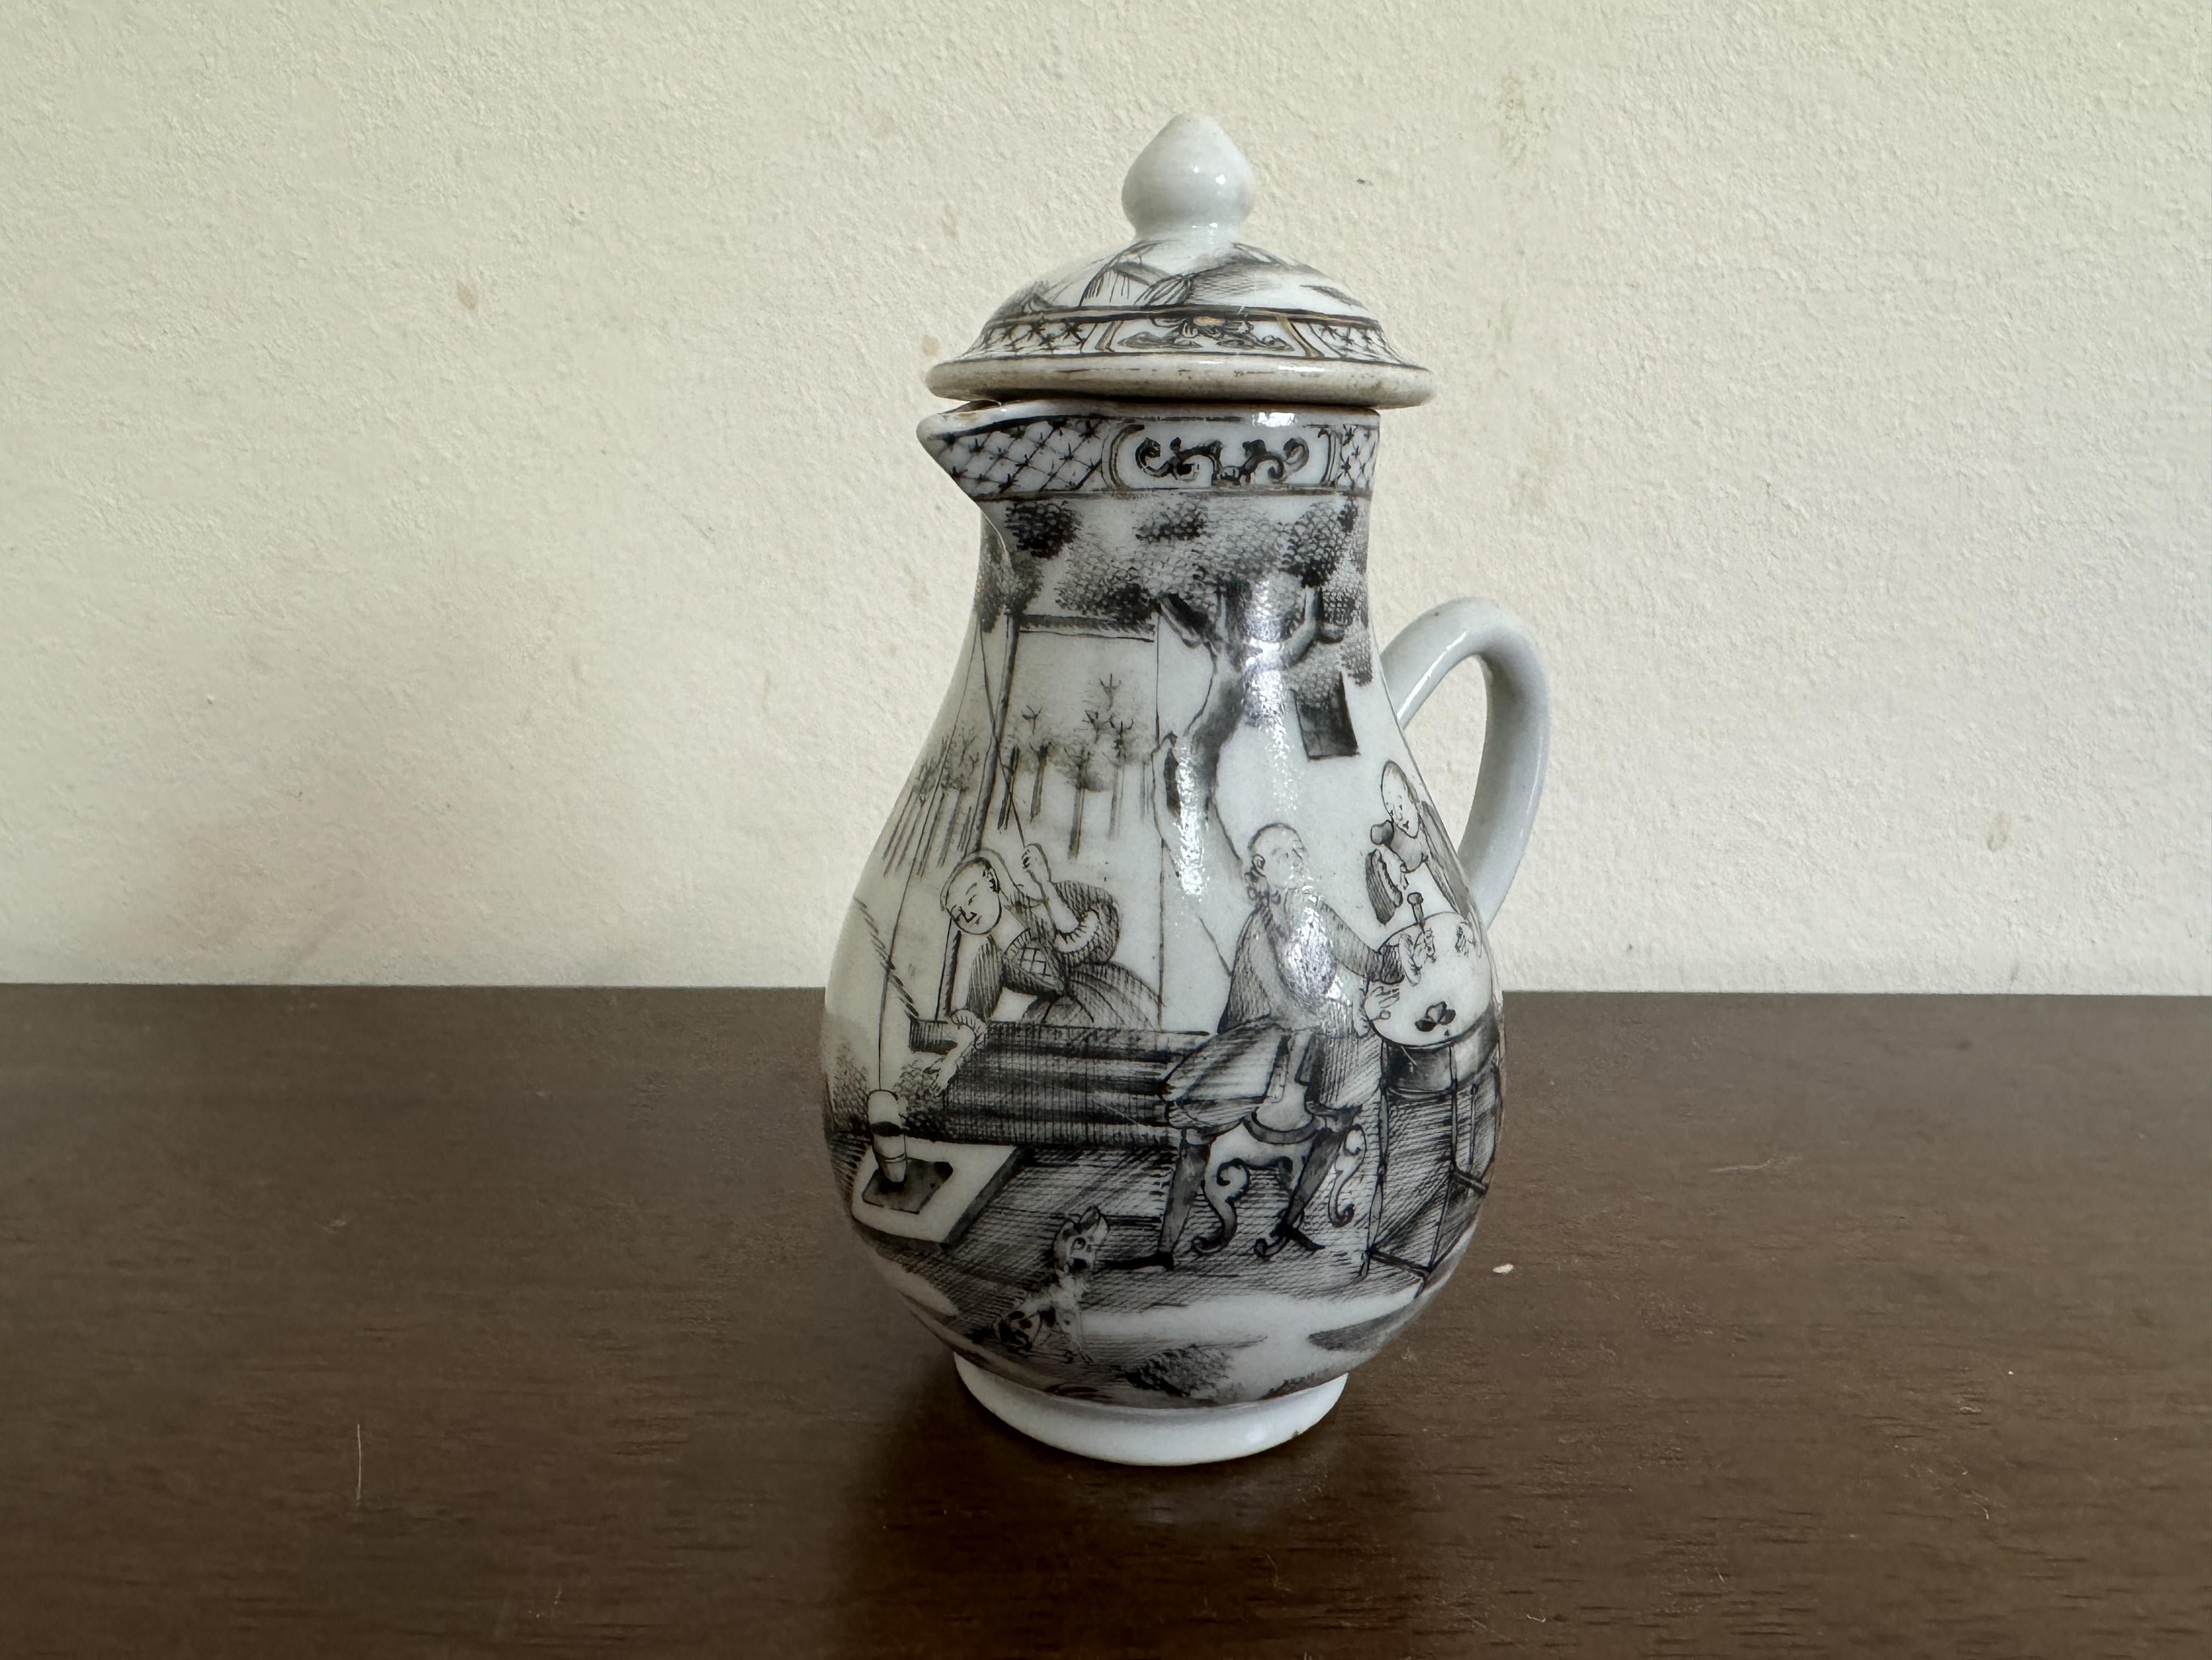 Chinese export Milk jug and Lid, from the 18th century Qianlong era featuring hand-painted grisaille designs, circa 1760. 

The jug rests on a foot ring, with a pear shaped body and handle, and a small triangular spout at the rim. The C-shaped